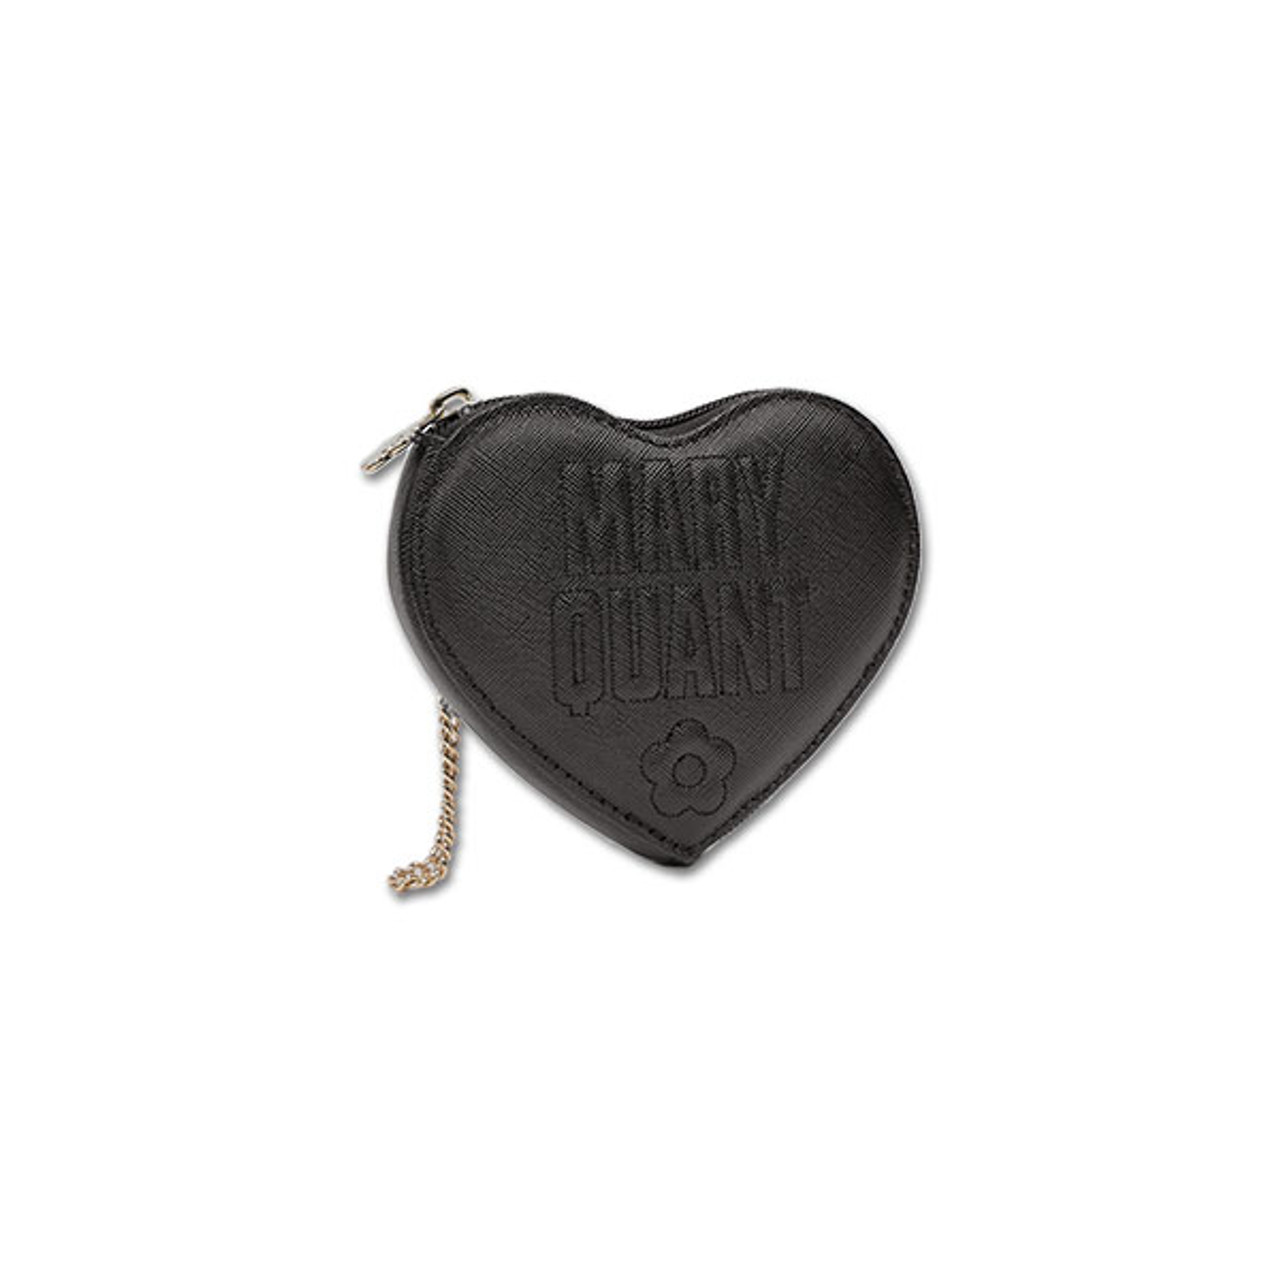 A black heart shaped mini pouch. It is made of pleather and has Mary Quant and the Mary Quant Daisy on the front. The zip is daisy shaped and gold and there is a gold chain which you can use to attach the pouch to your bag.